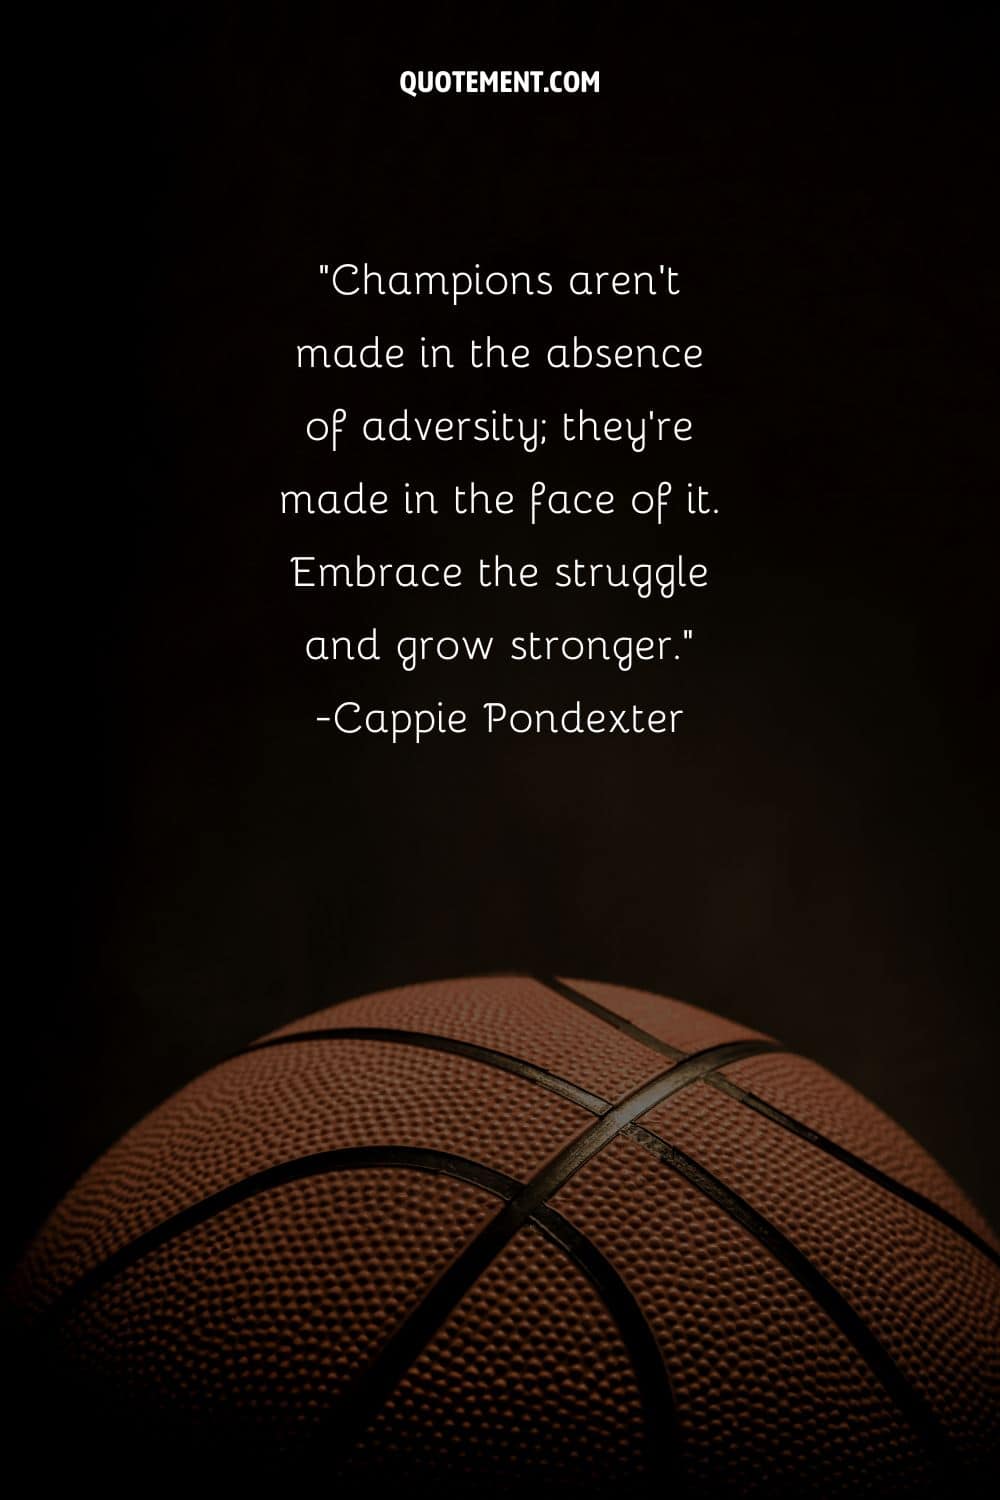 Champions aren't made in the absence of adversity